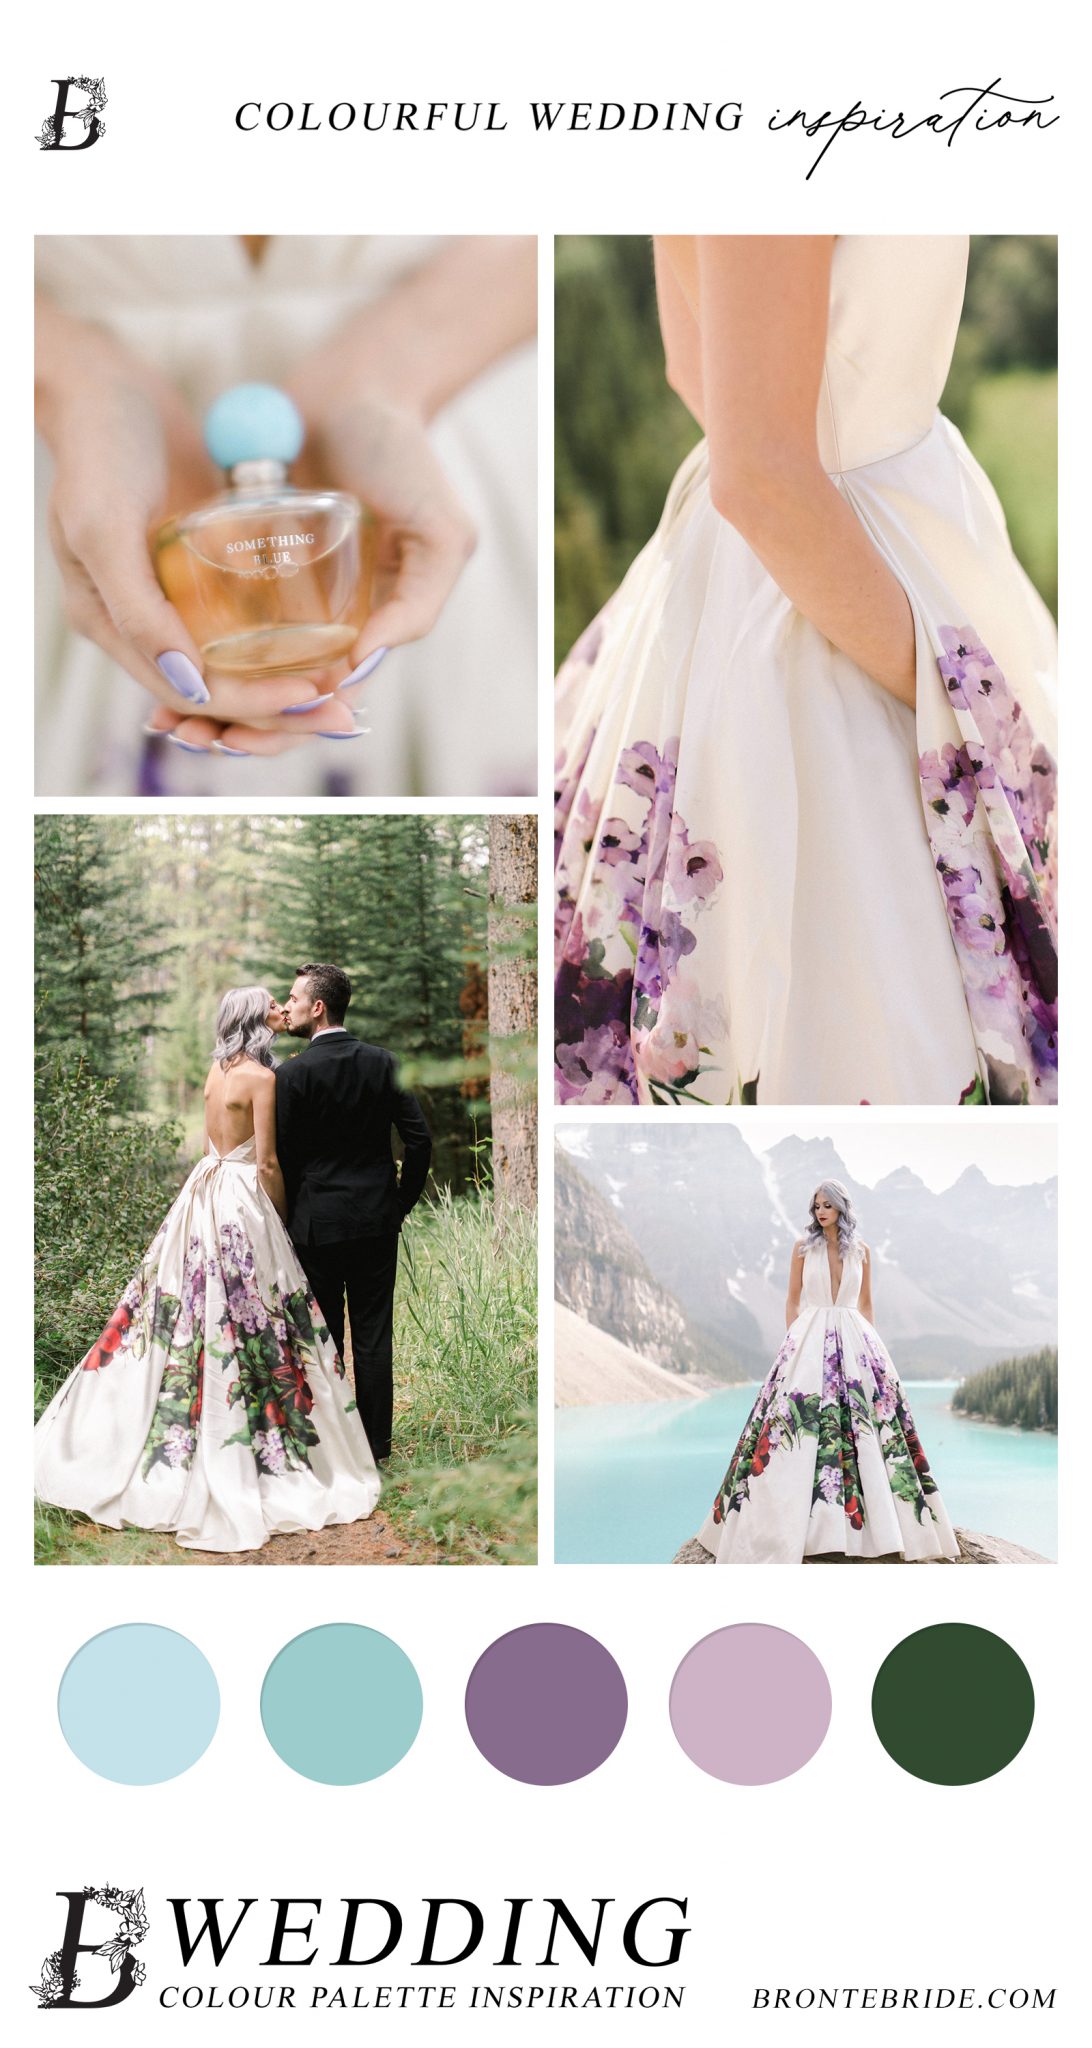 Modern Wedding Colour Palette Inspiration - This Bride's Colourful Wedding Dress Will Have You Swooning at This Non-Traditional RimRock Resort Wedding in Banff